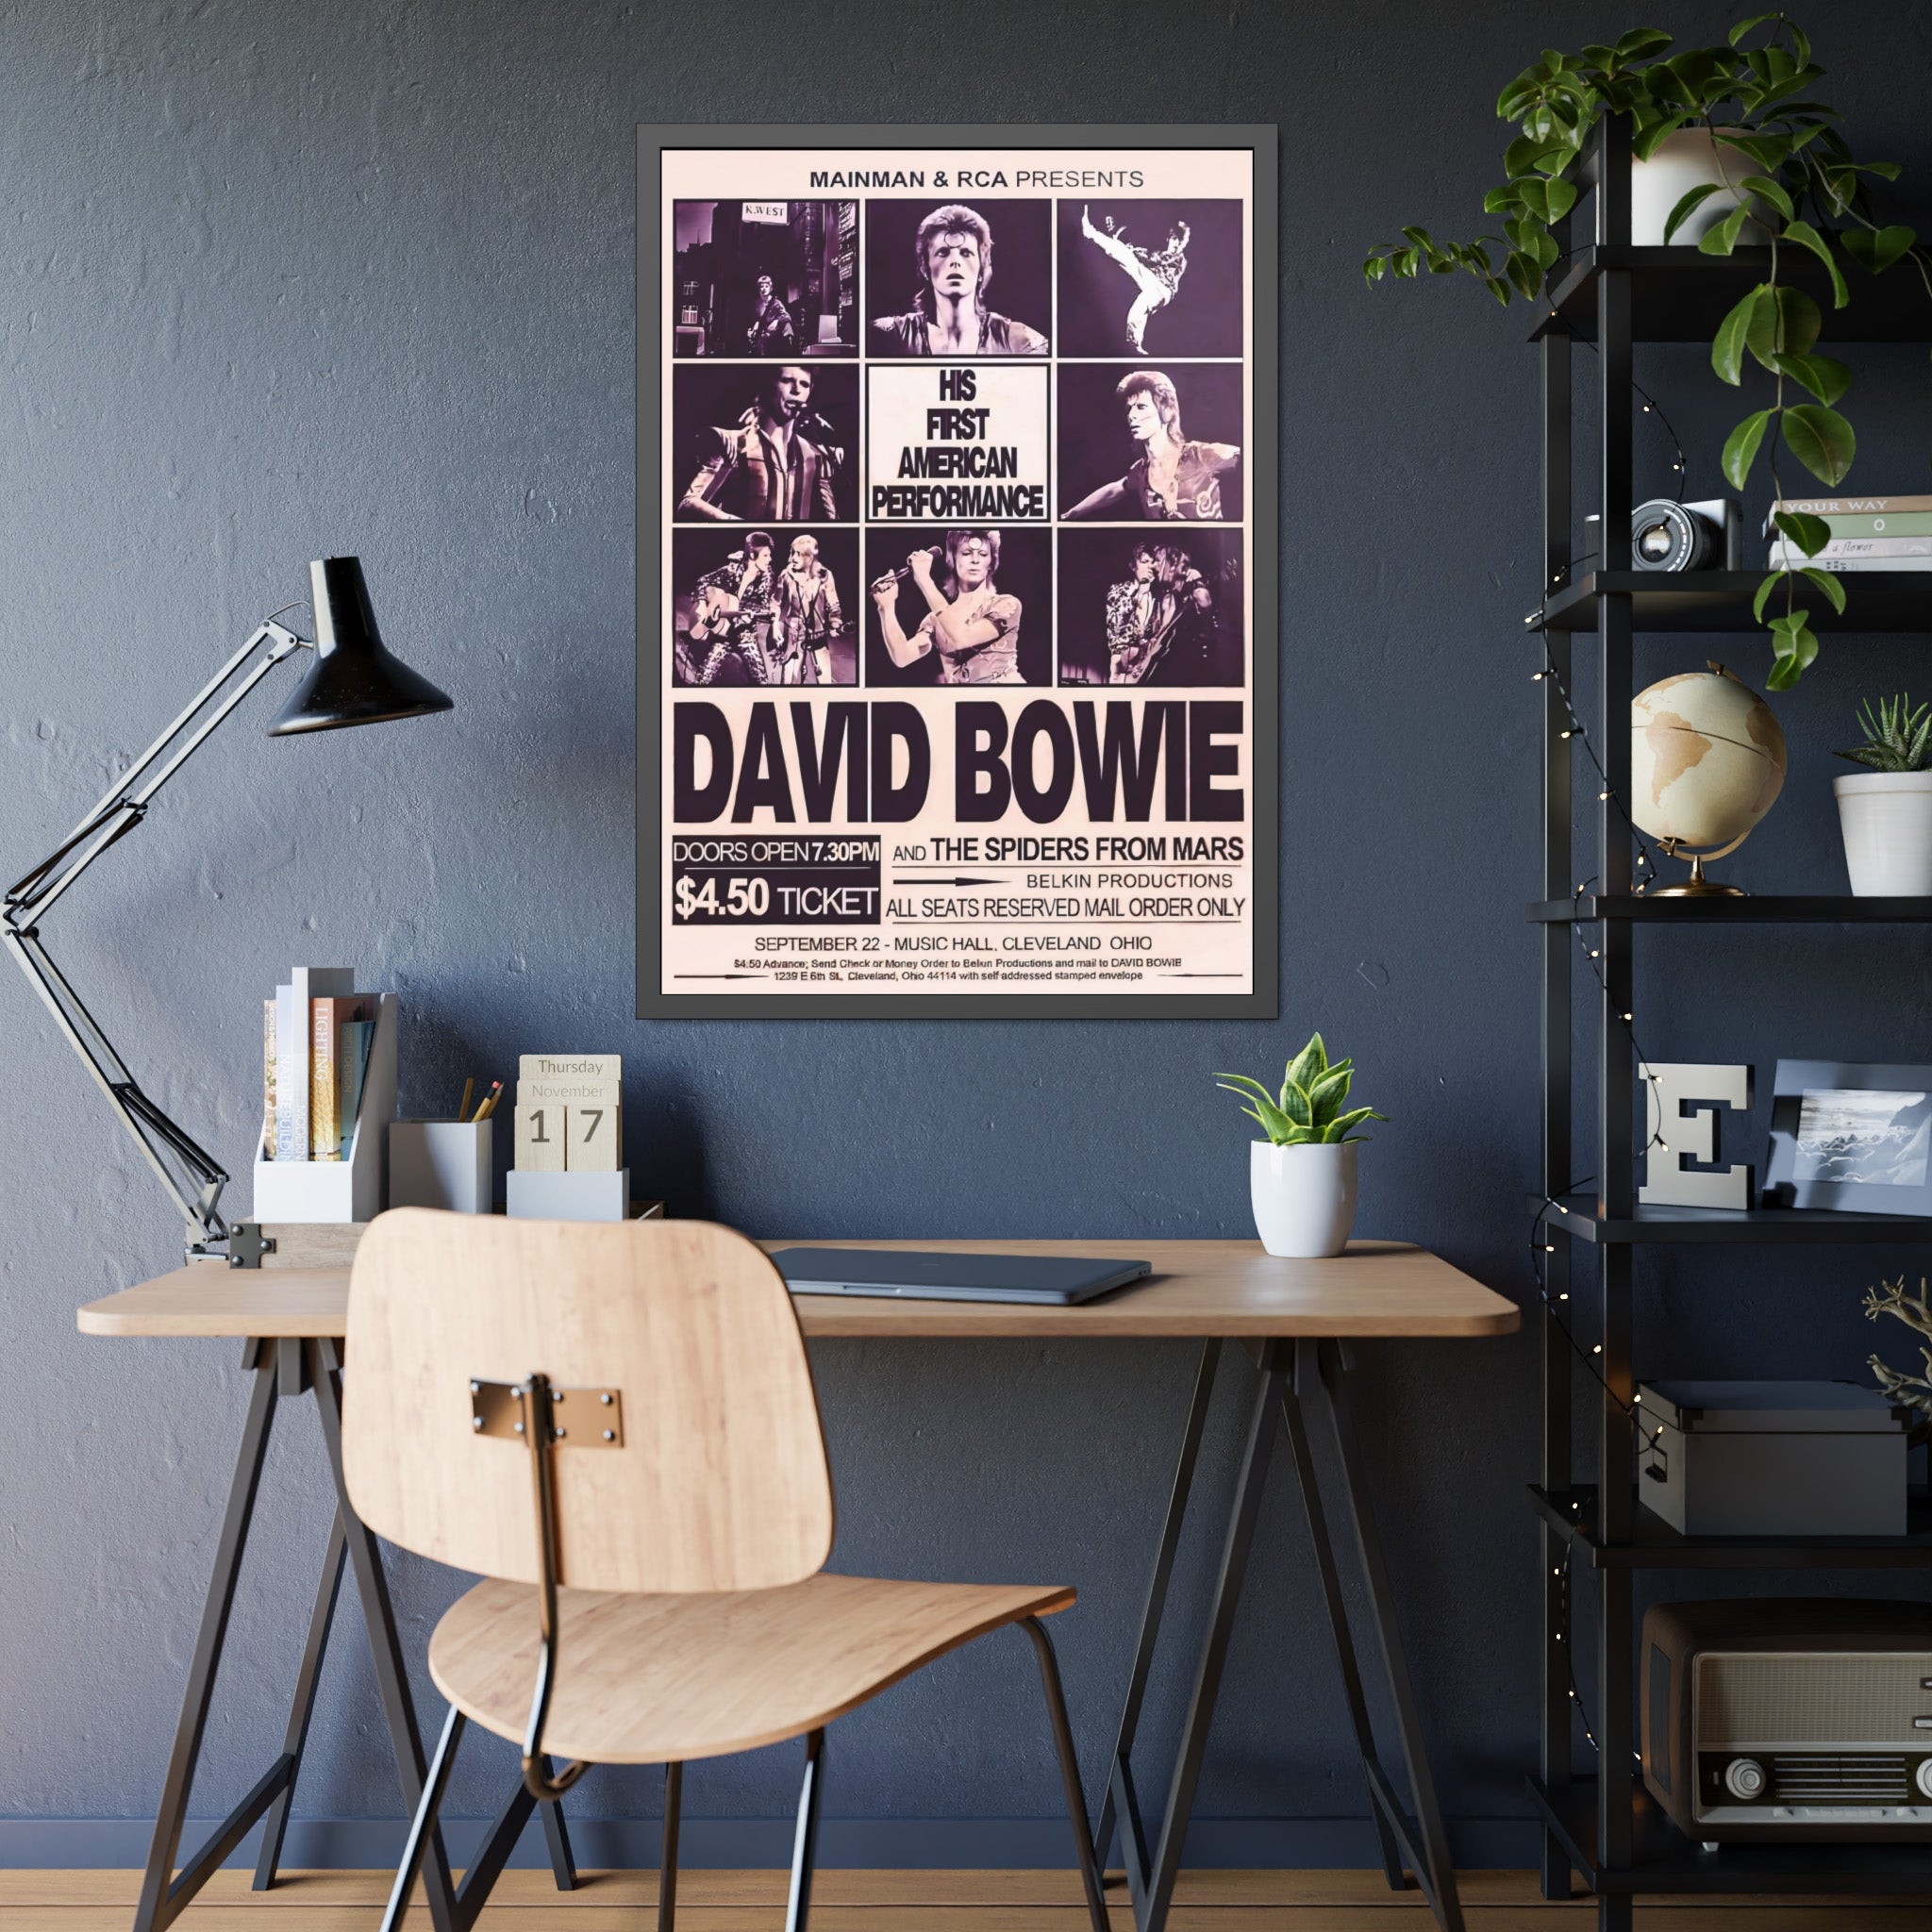 David Bowie and The Spiders From Mars Concert Poster